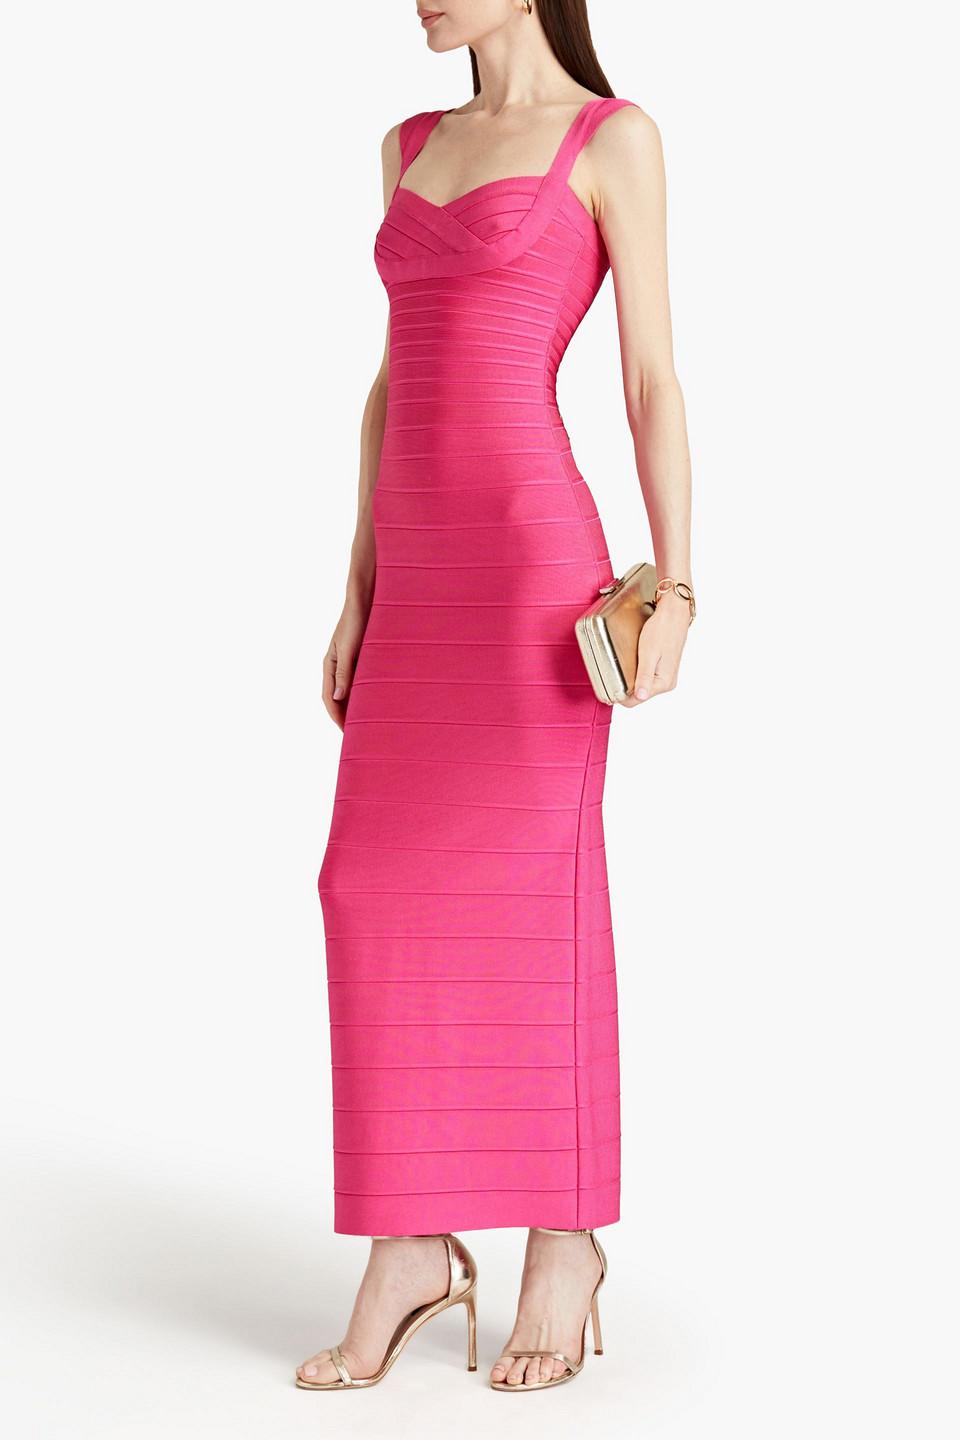 Hervé Léger Bandage Gown in Pink | Lyst